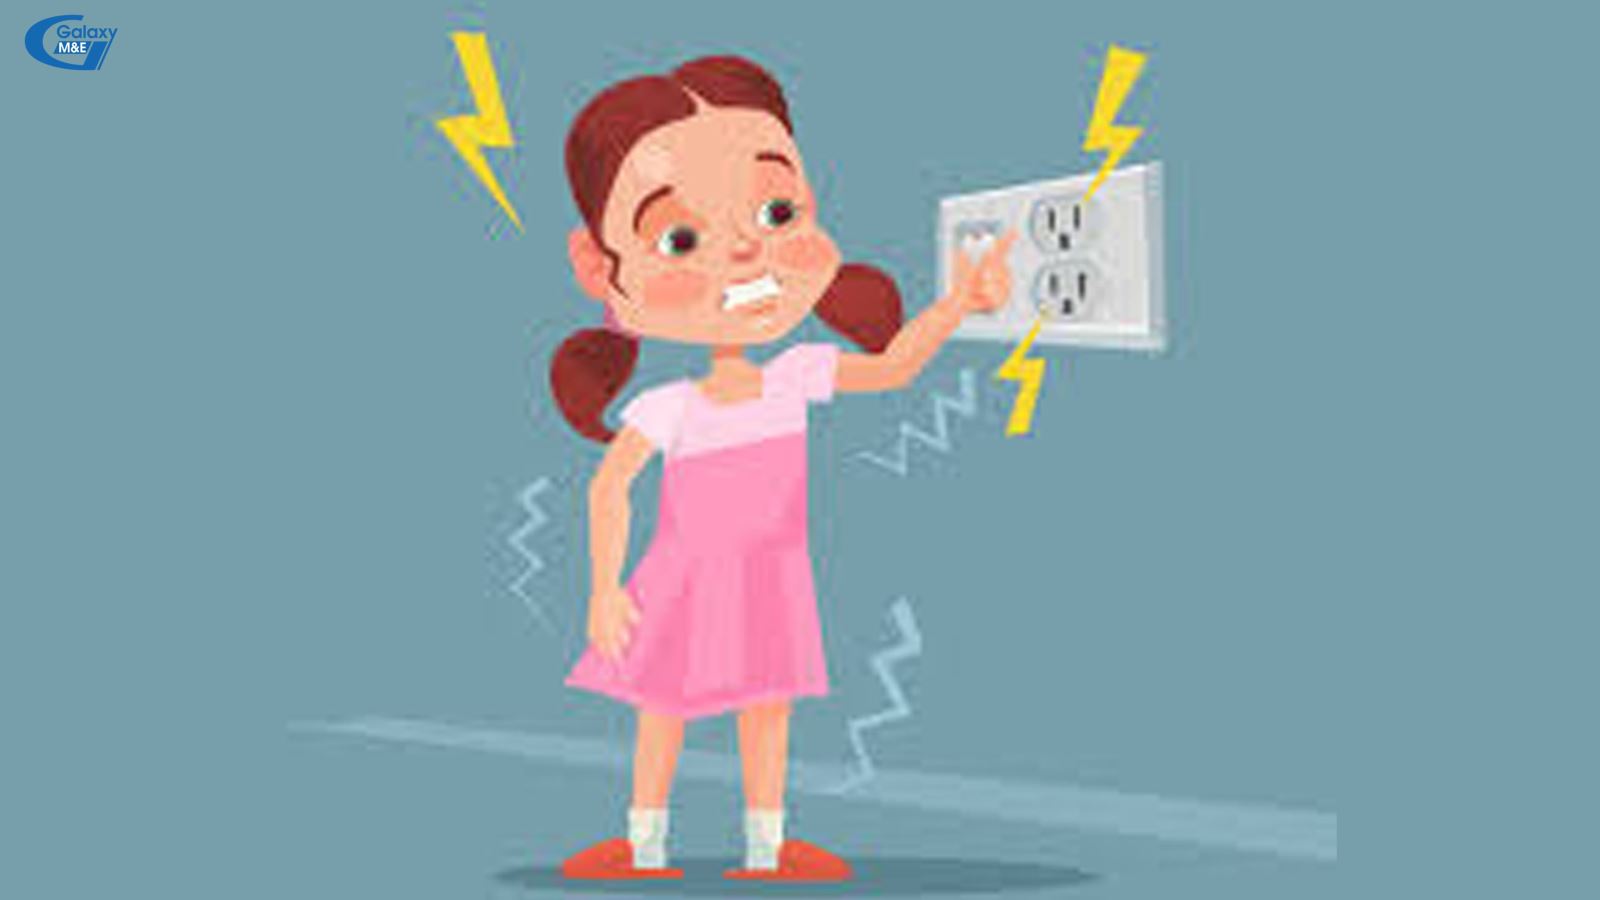 Curiosity of children is the risk of electrical accidents if adults do not take precautions Galaxy M&E